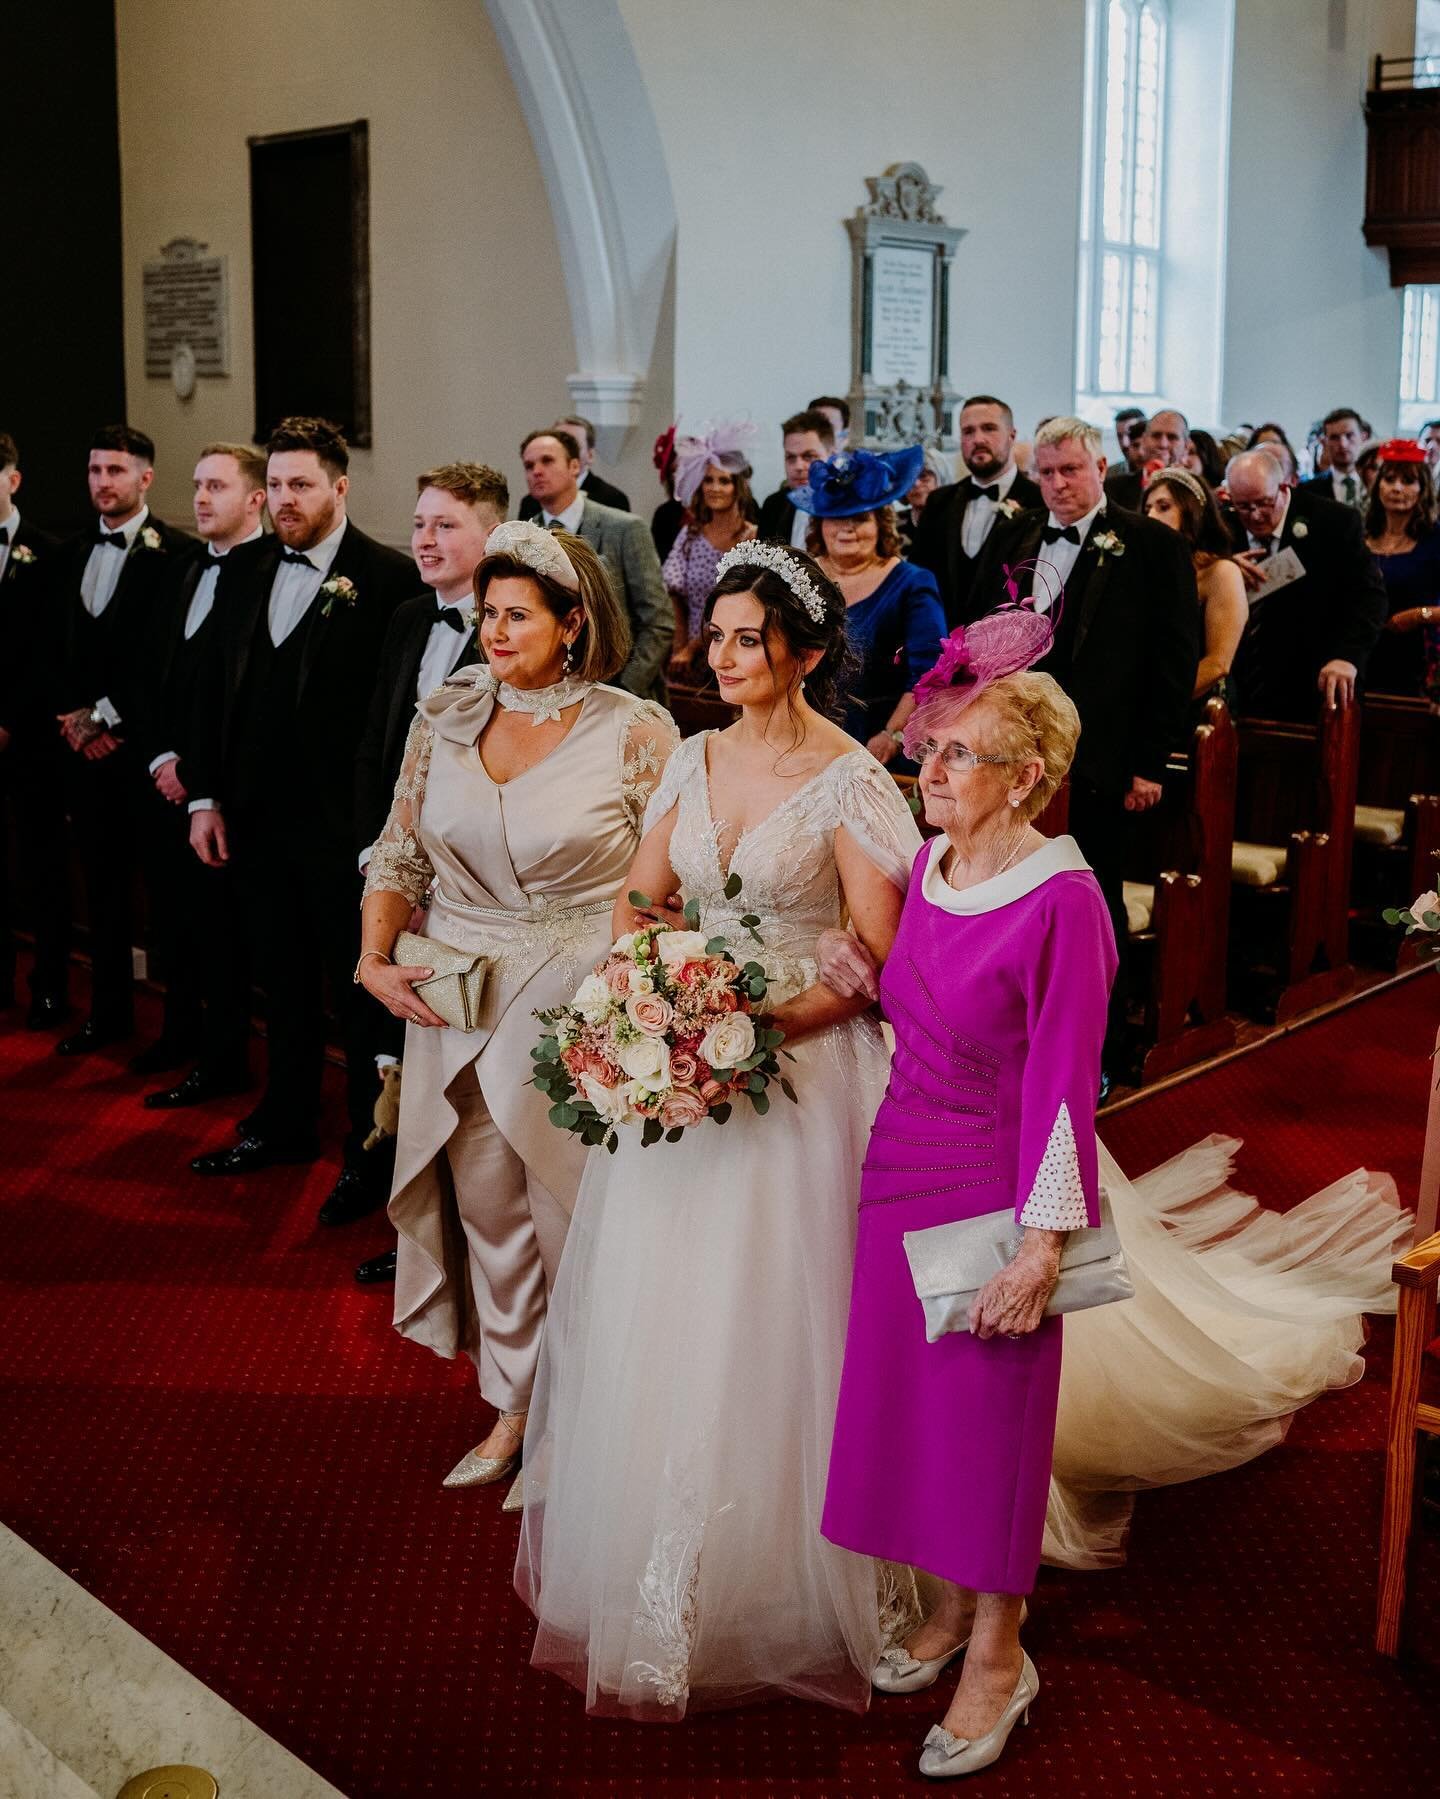 One of the most sweetest moments watching three generations walking down the aisle ❤️
Kirsty, her Mummy and Granny; the same aisle her Granny and Granda walked down 62 years ago. 
How precious.